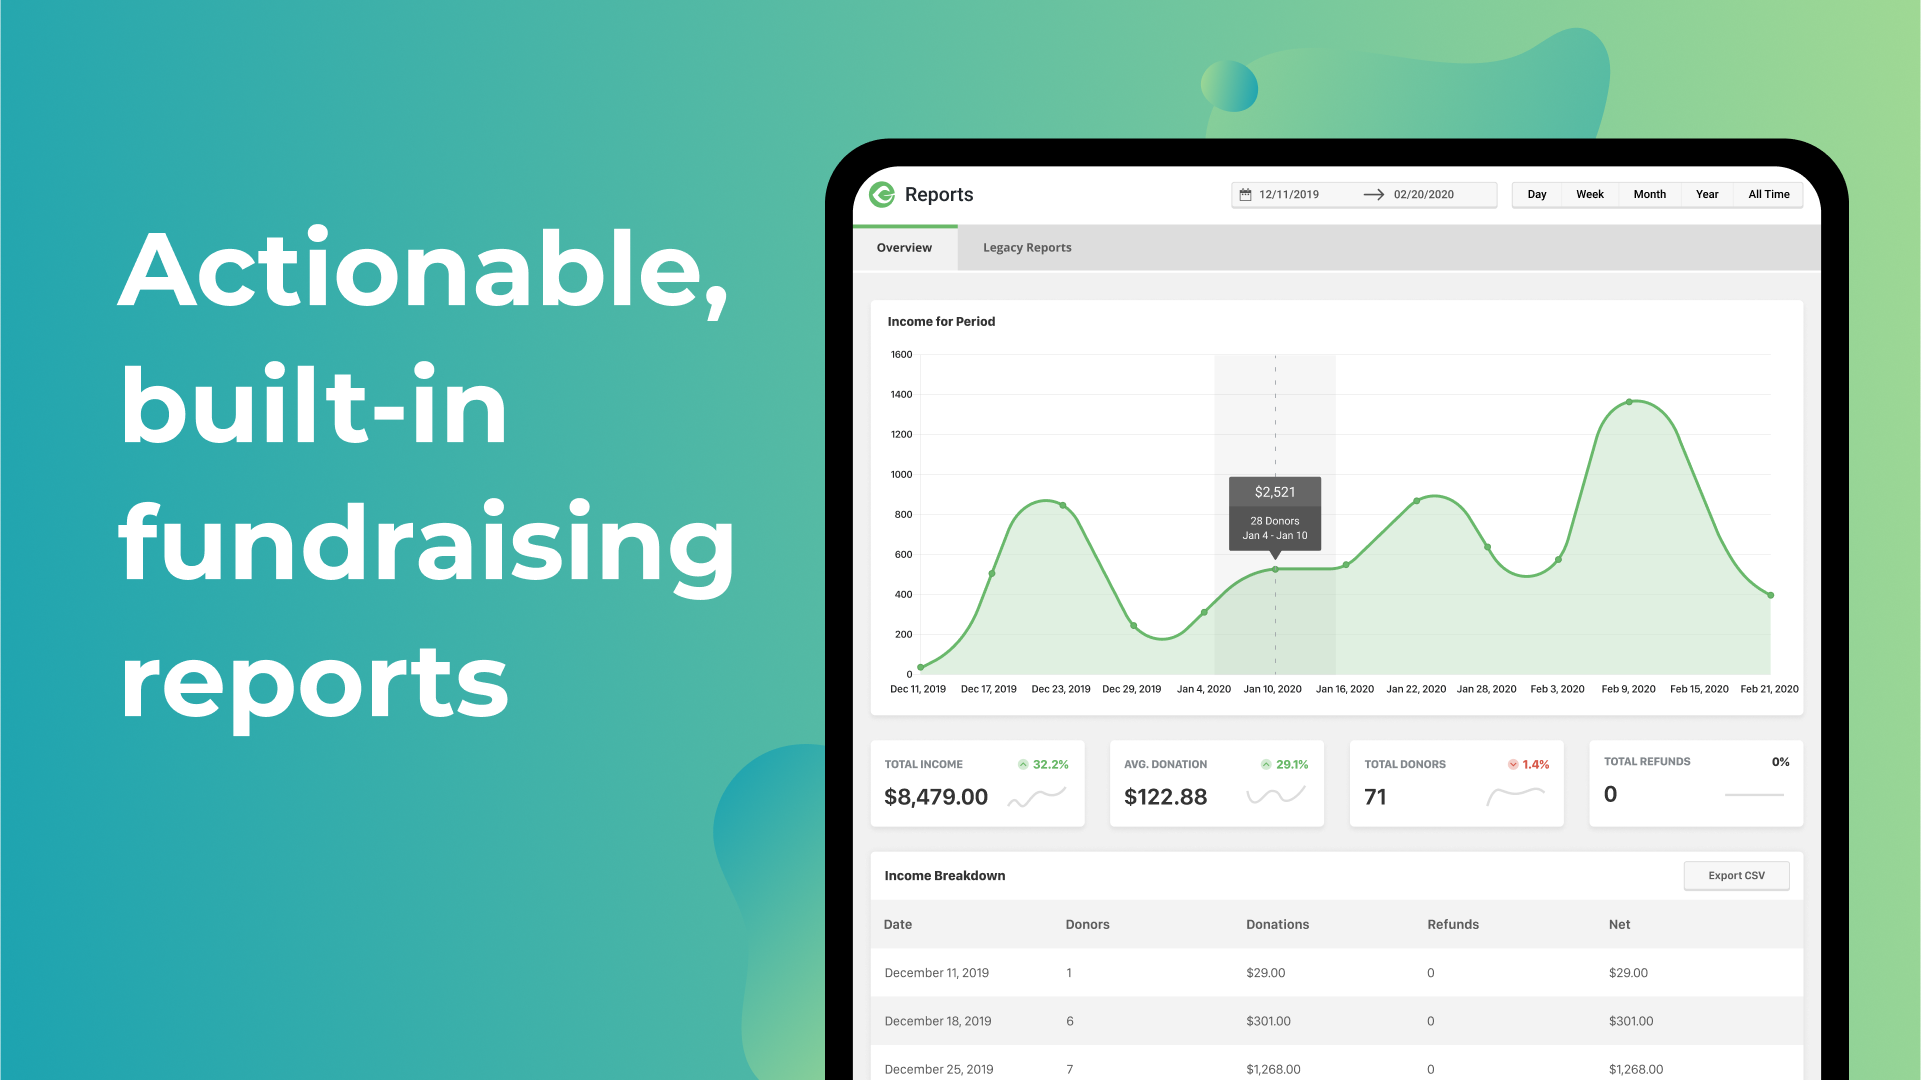 Actionable, built-in fundraising reports